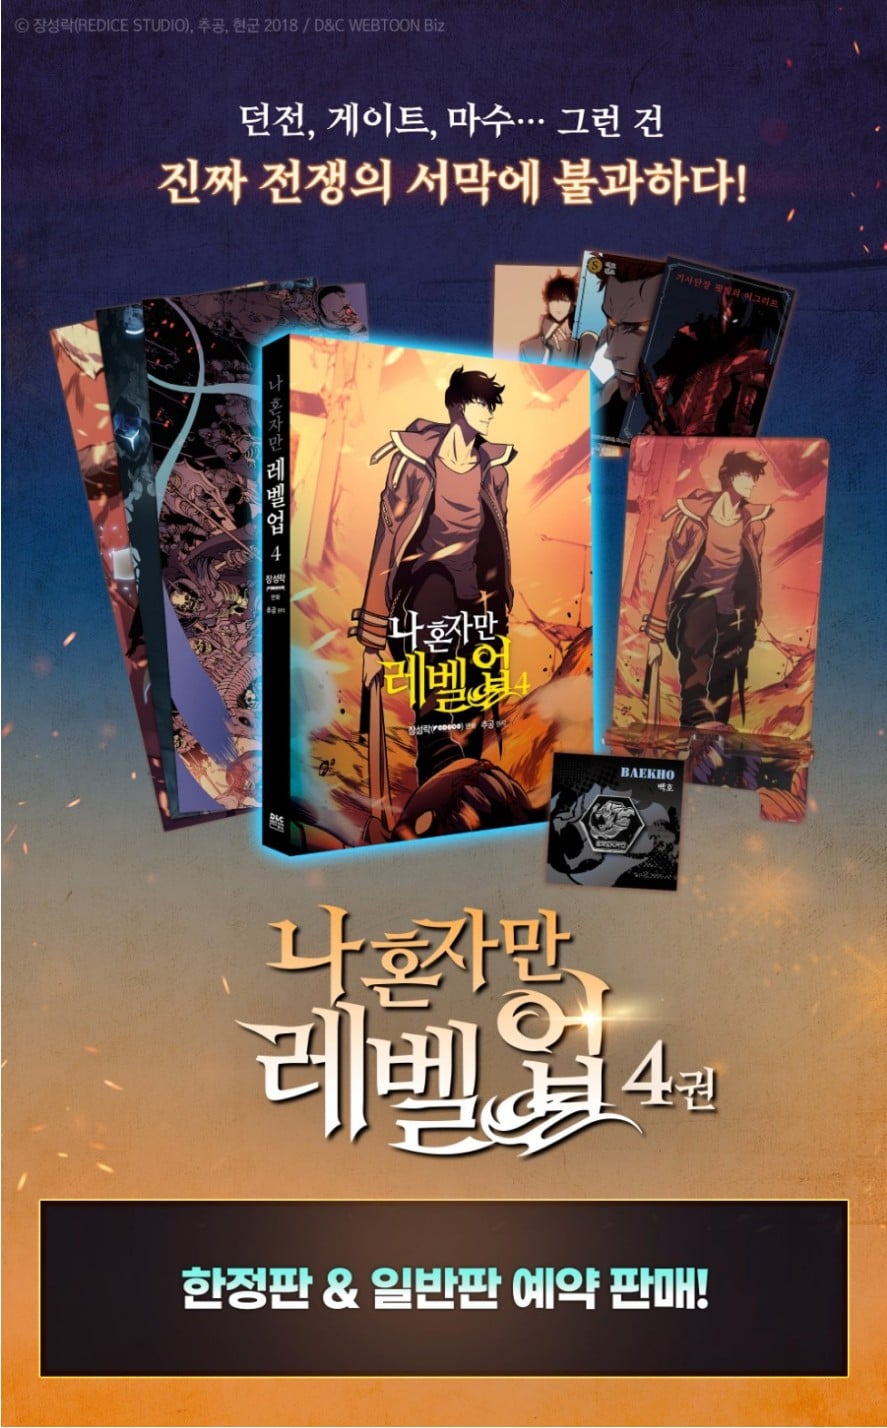 Solo Leveling 4 Limited Edition - Now In Seoul